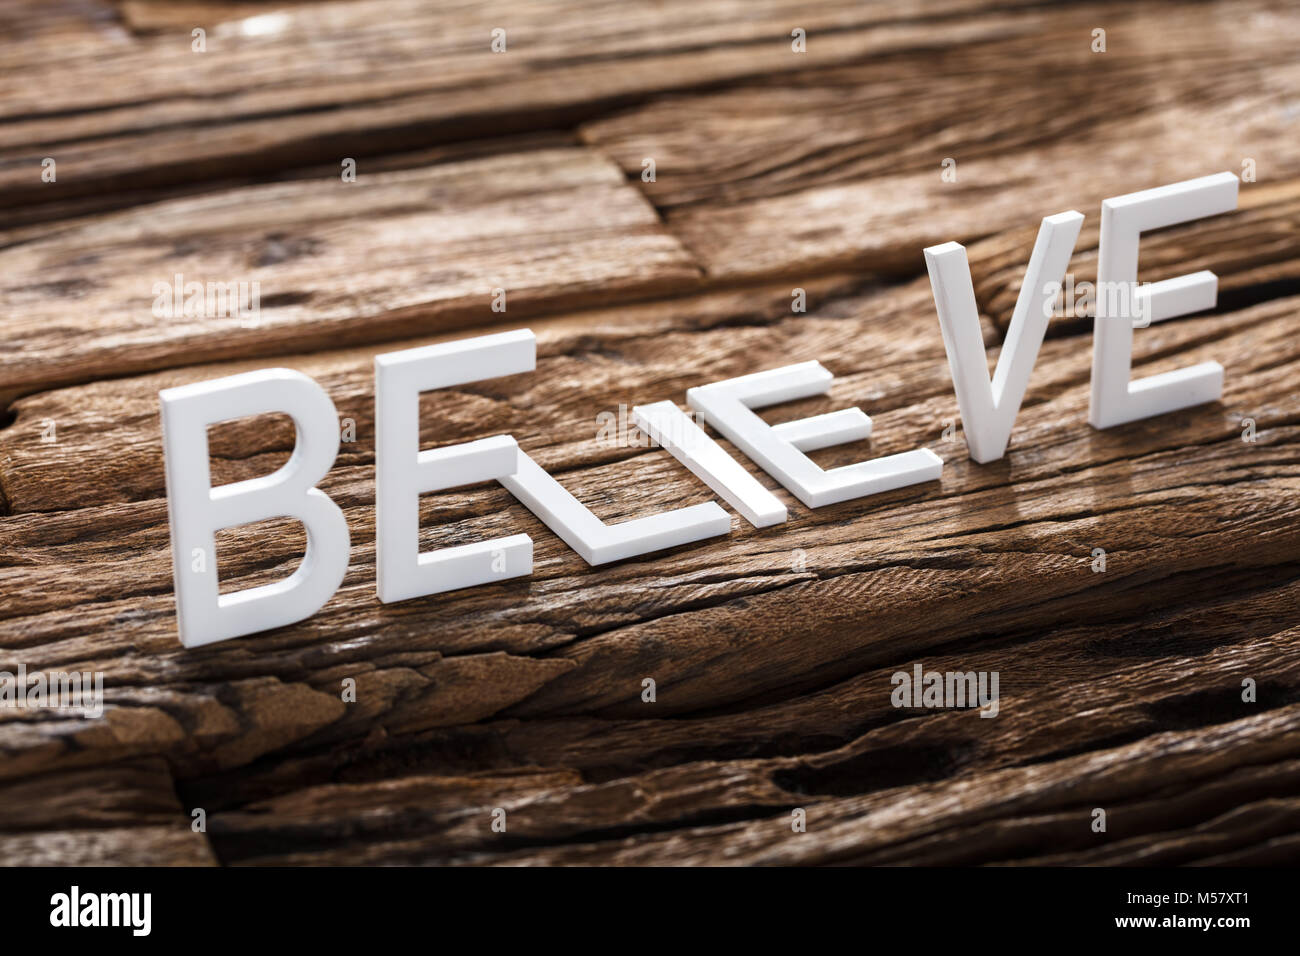 Closeup of believe or lie words on wood Stock Photo